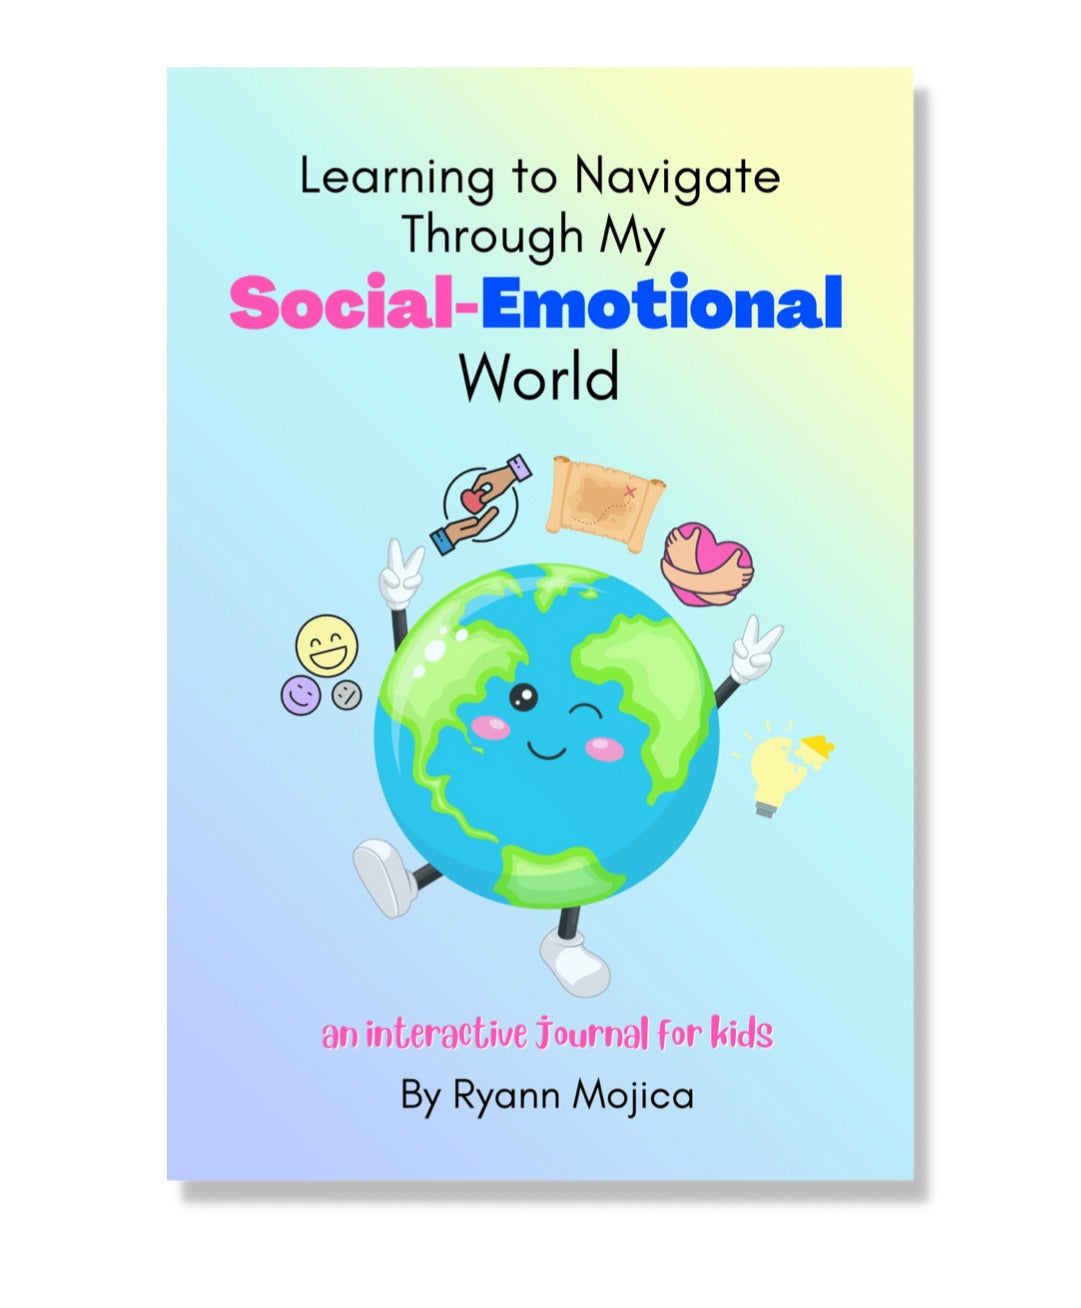 Learning to Navigate Through My Social-Emotional World